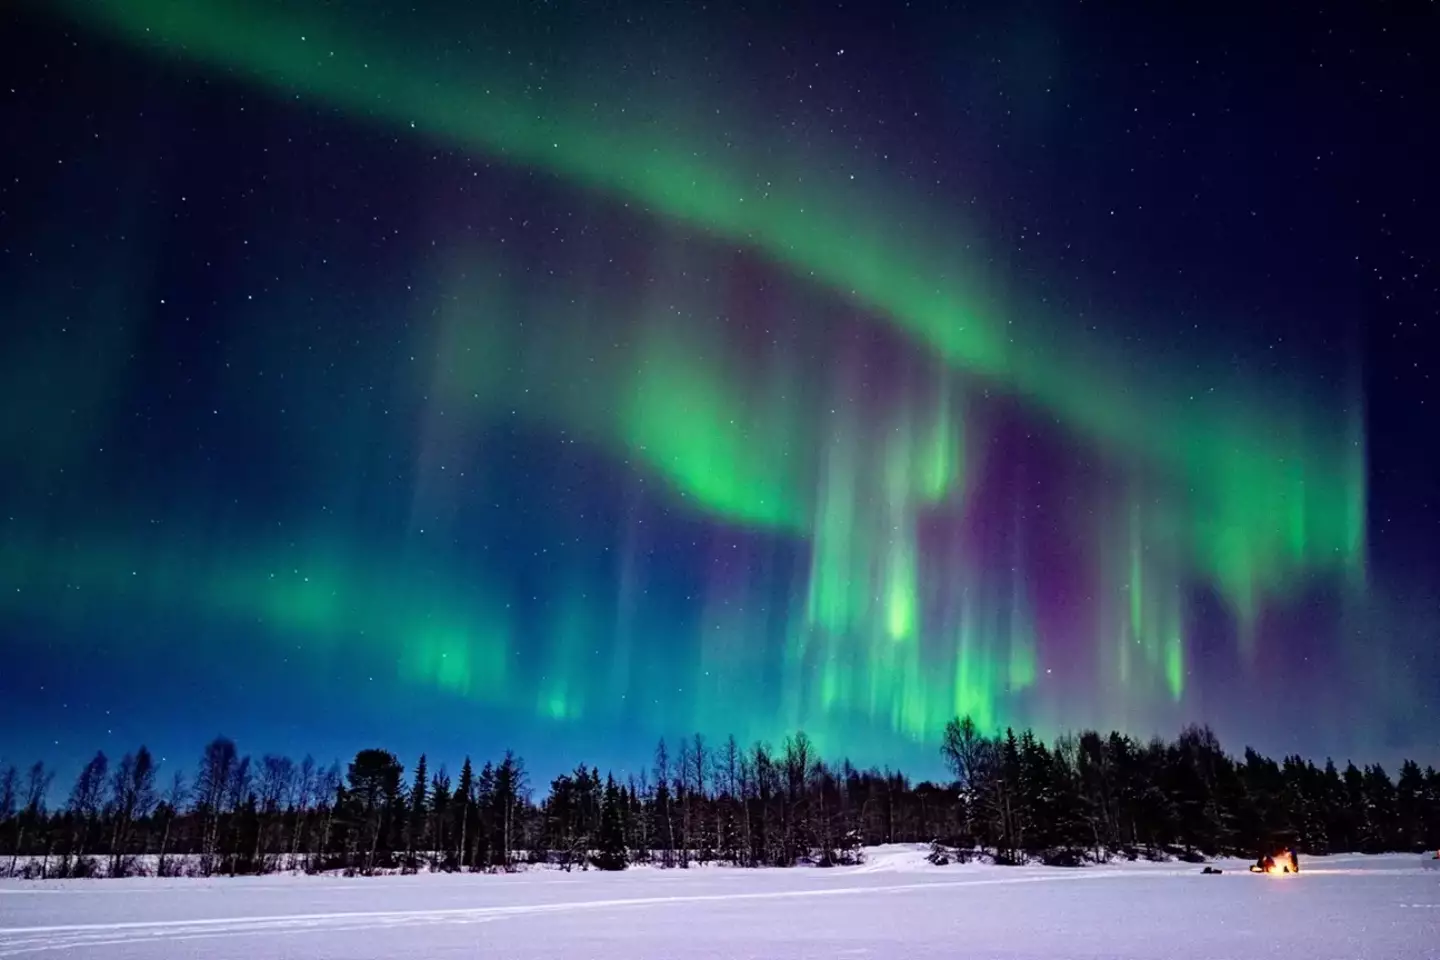 Brits are in for an epic treat and don't have to fork out on a flight to see the aurora.